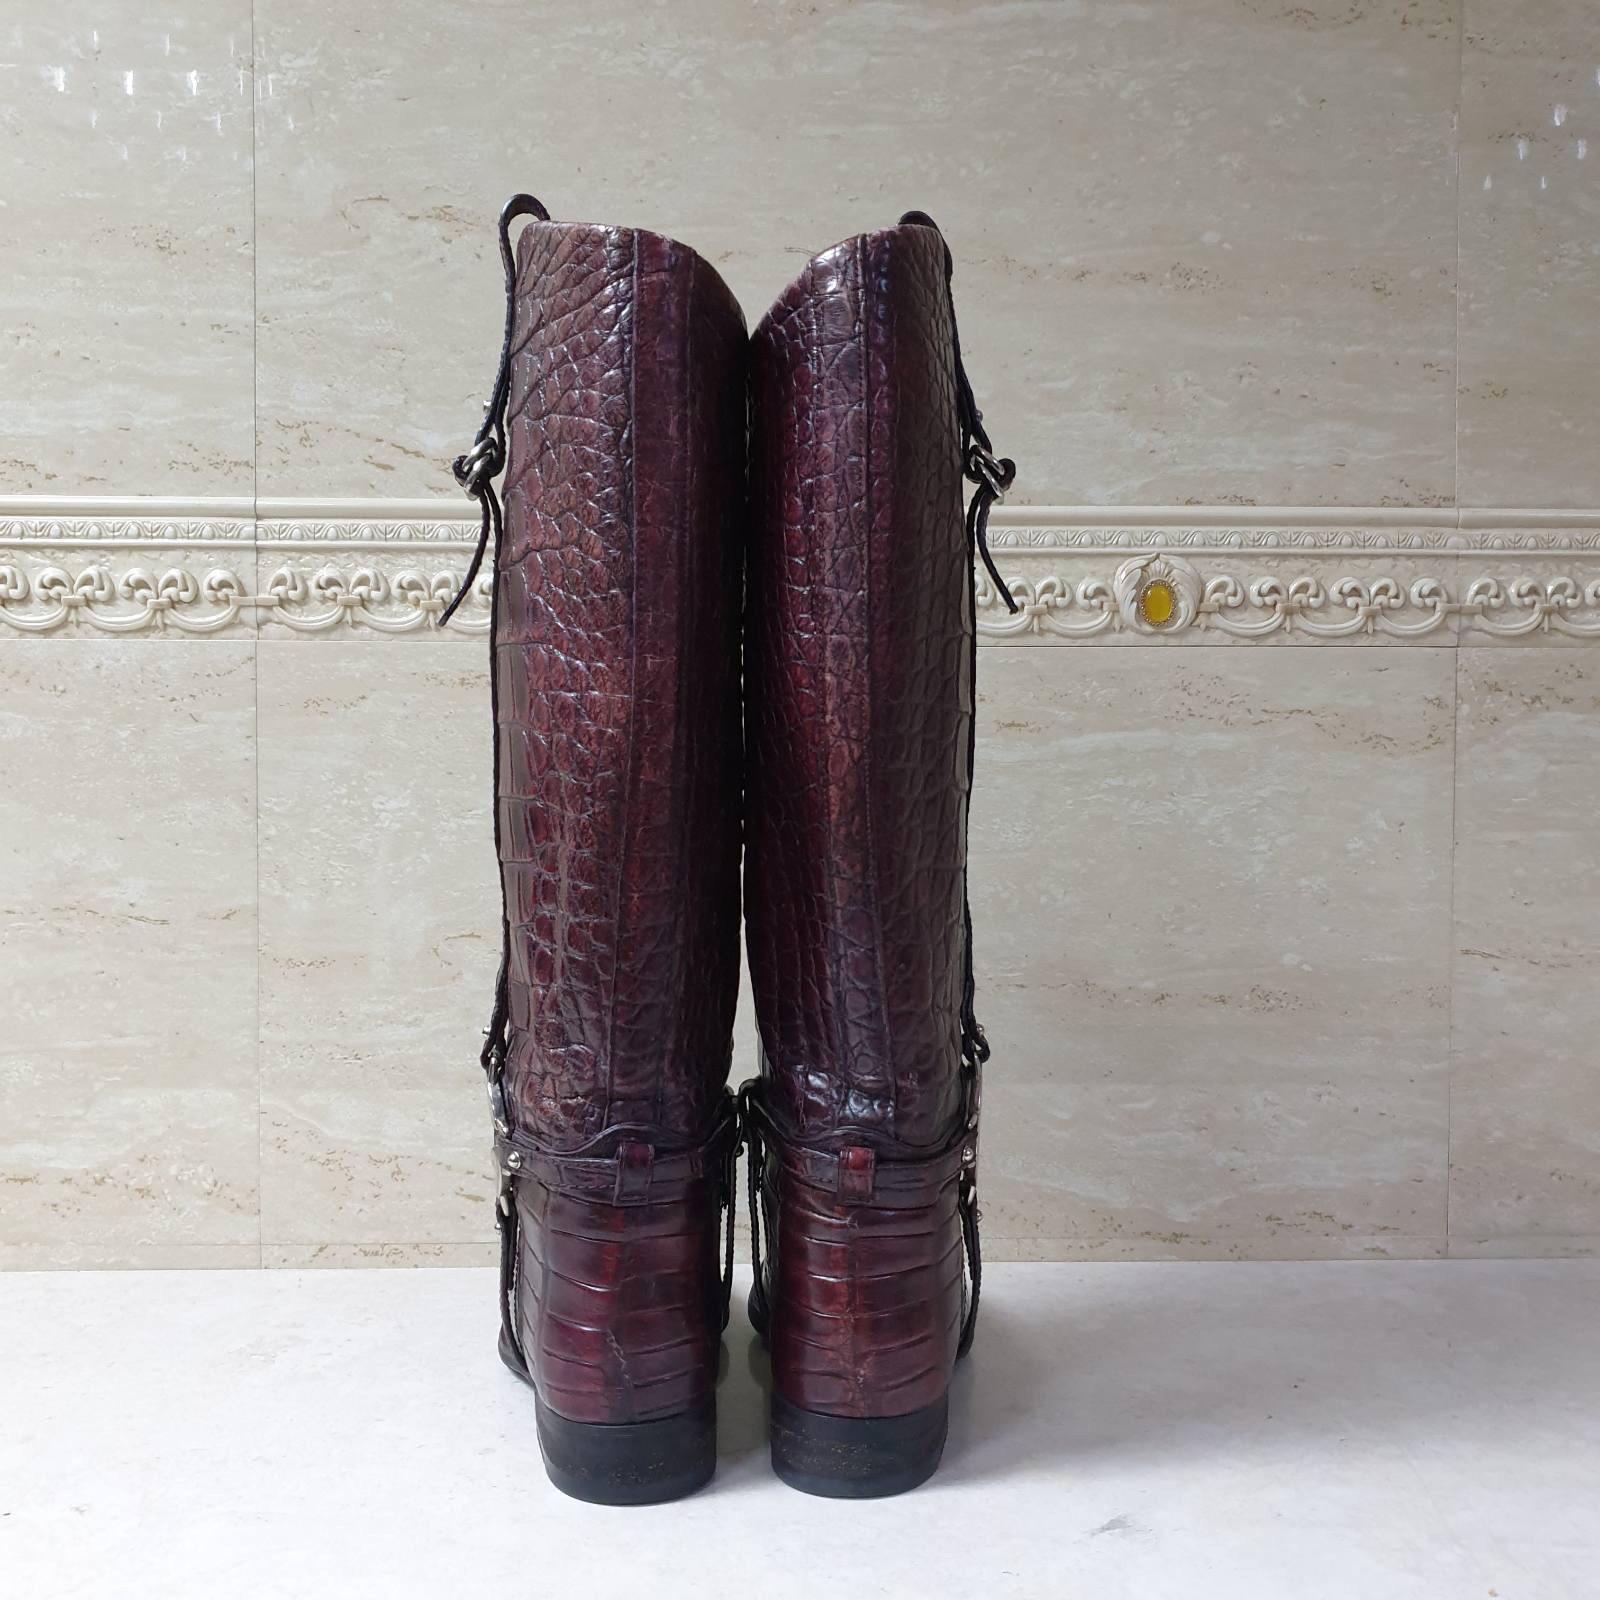 Limited edition crocodile boots in eggplant color. 
These boots  come with duster. 
This is a limited edition of Gucci's riding boots in a rich eggplant crocodile. 
Stunning
Sz.38
Condition is very good.
Shippig from Poland.